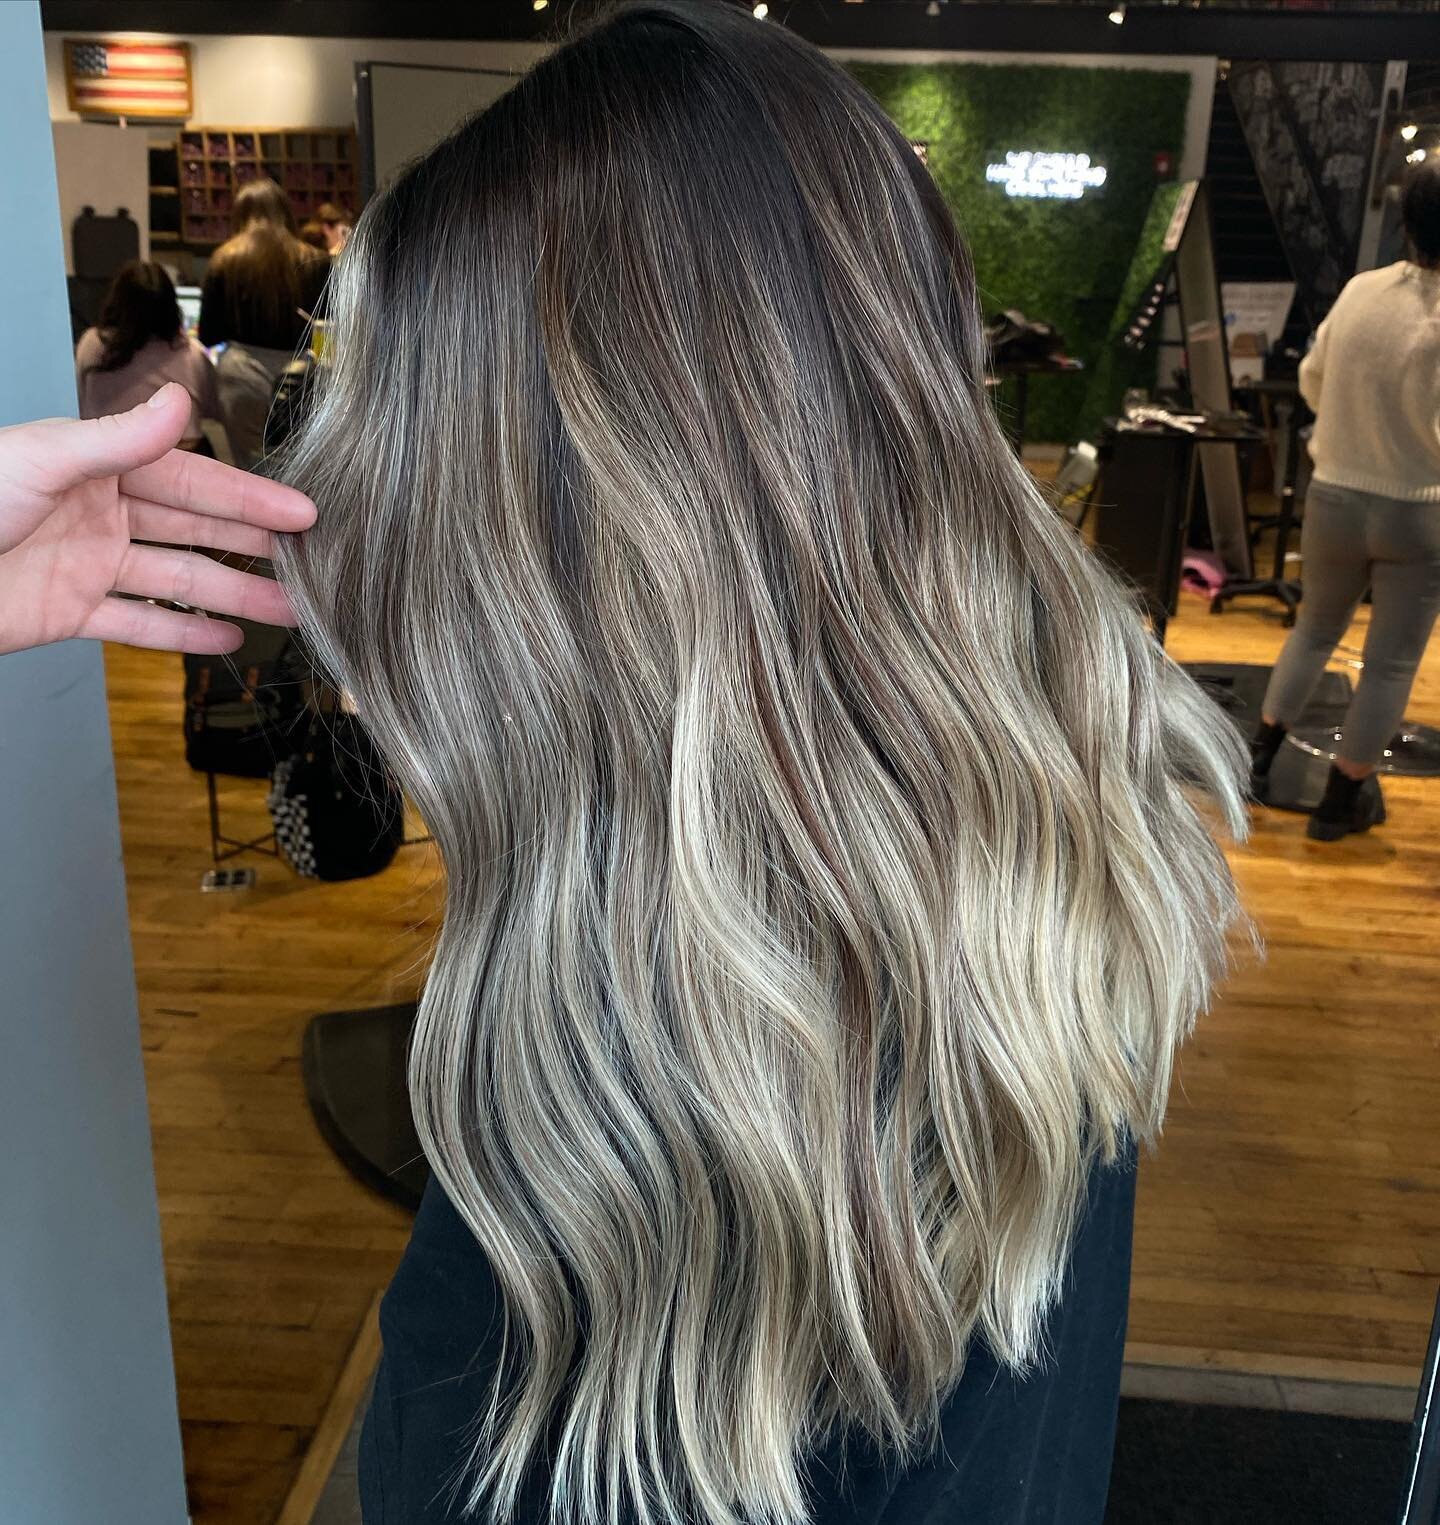 Transitioning this platinum babe into a more lived-in, low maintenance queen!
&bull;
&bull;
&bull;

#stlhairstylist #stlhair #stlhairsalon #stlstylist #stlextensions #stlblondingspecialist #stlreels #hairreels #haireducation #hairstylistreels #hairst